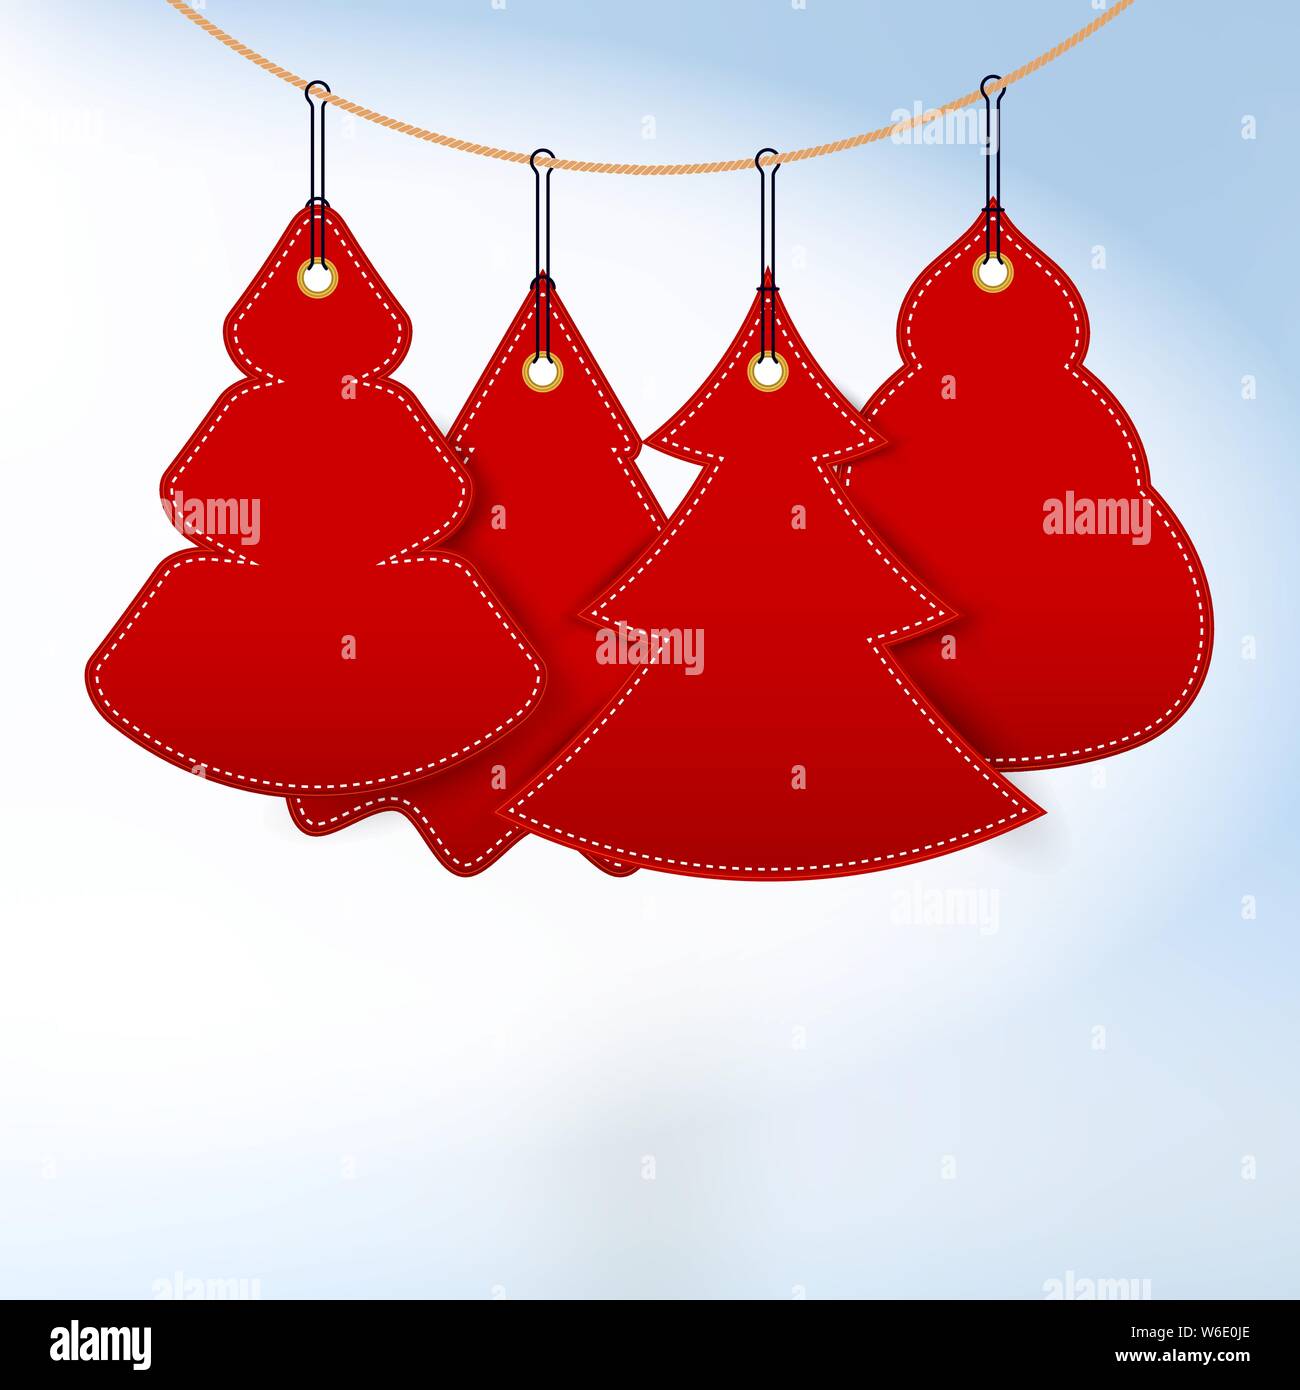 Hanging Simple Christmas Trees. Blank Red Paper Cut Christmas Trees. Background, Template. Christmas Greeting Card. Vector Illustration. Stock Vector